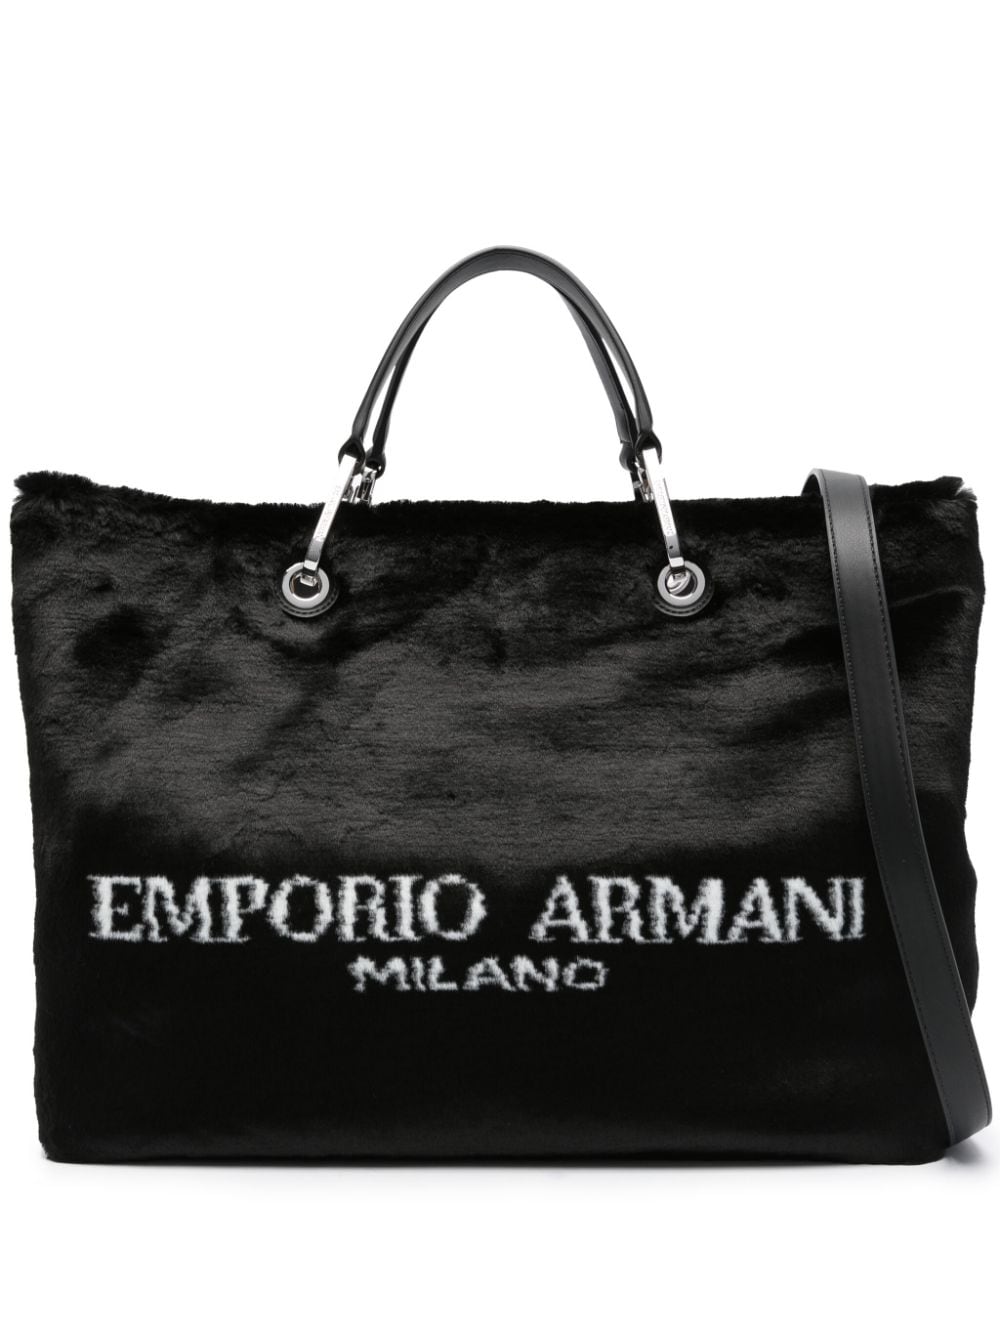 Canvas Weekend Bag With Leather Details by Emporio Armani Men at